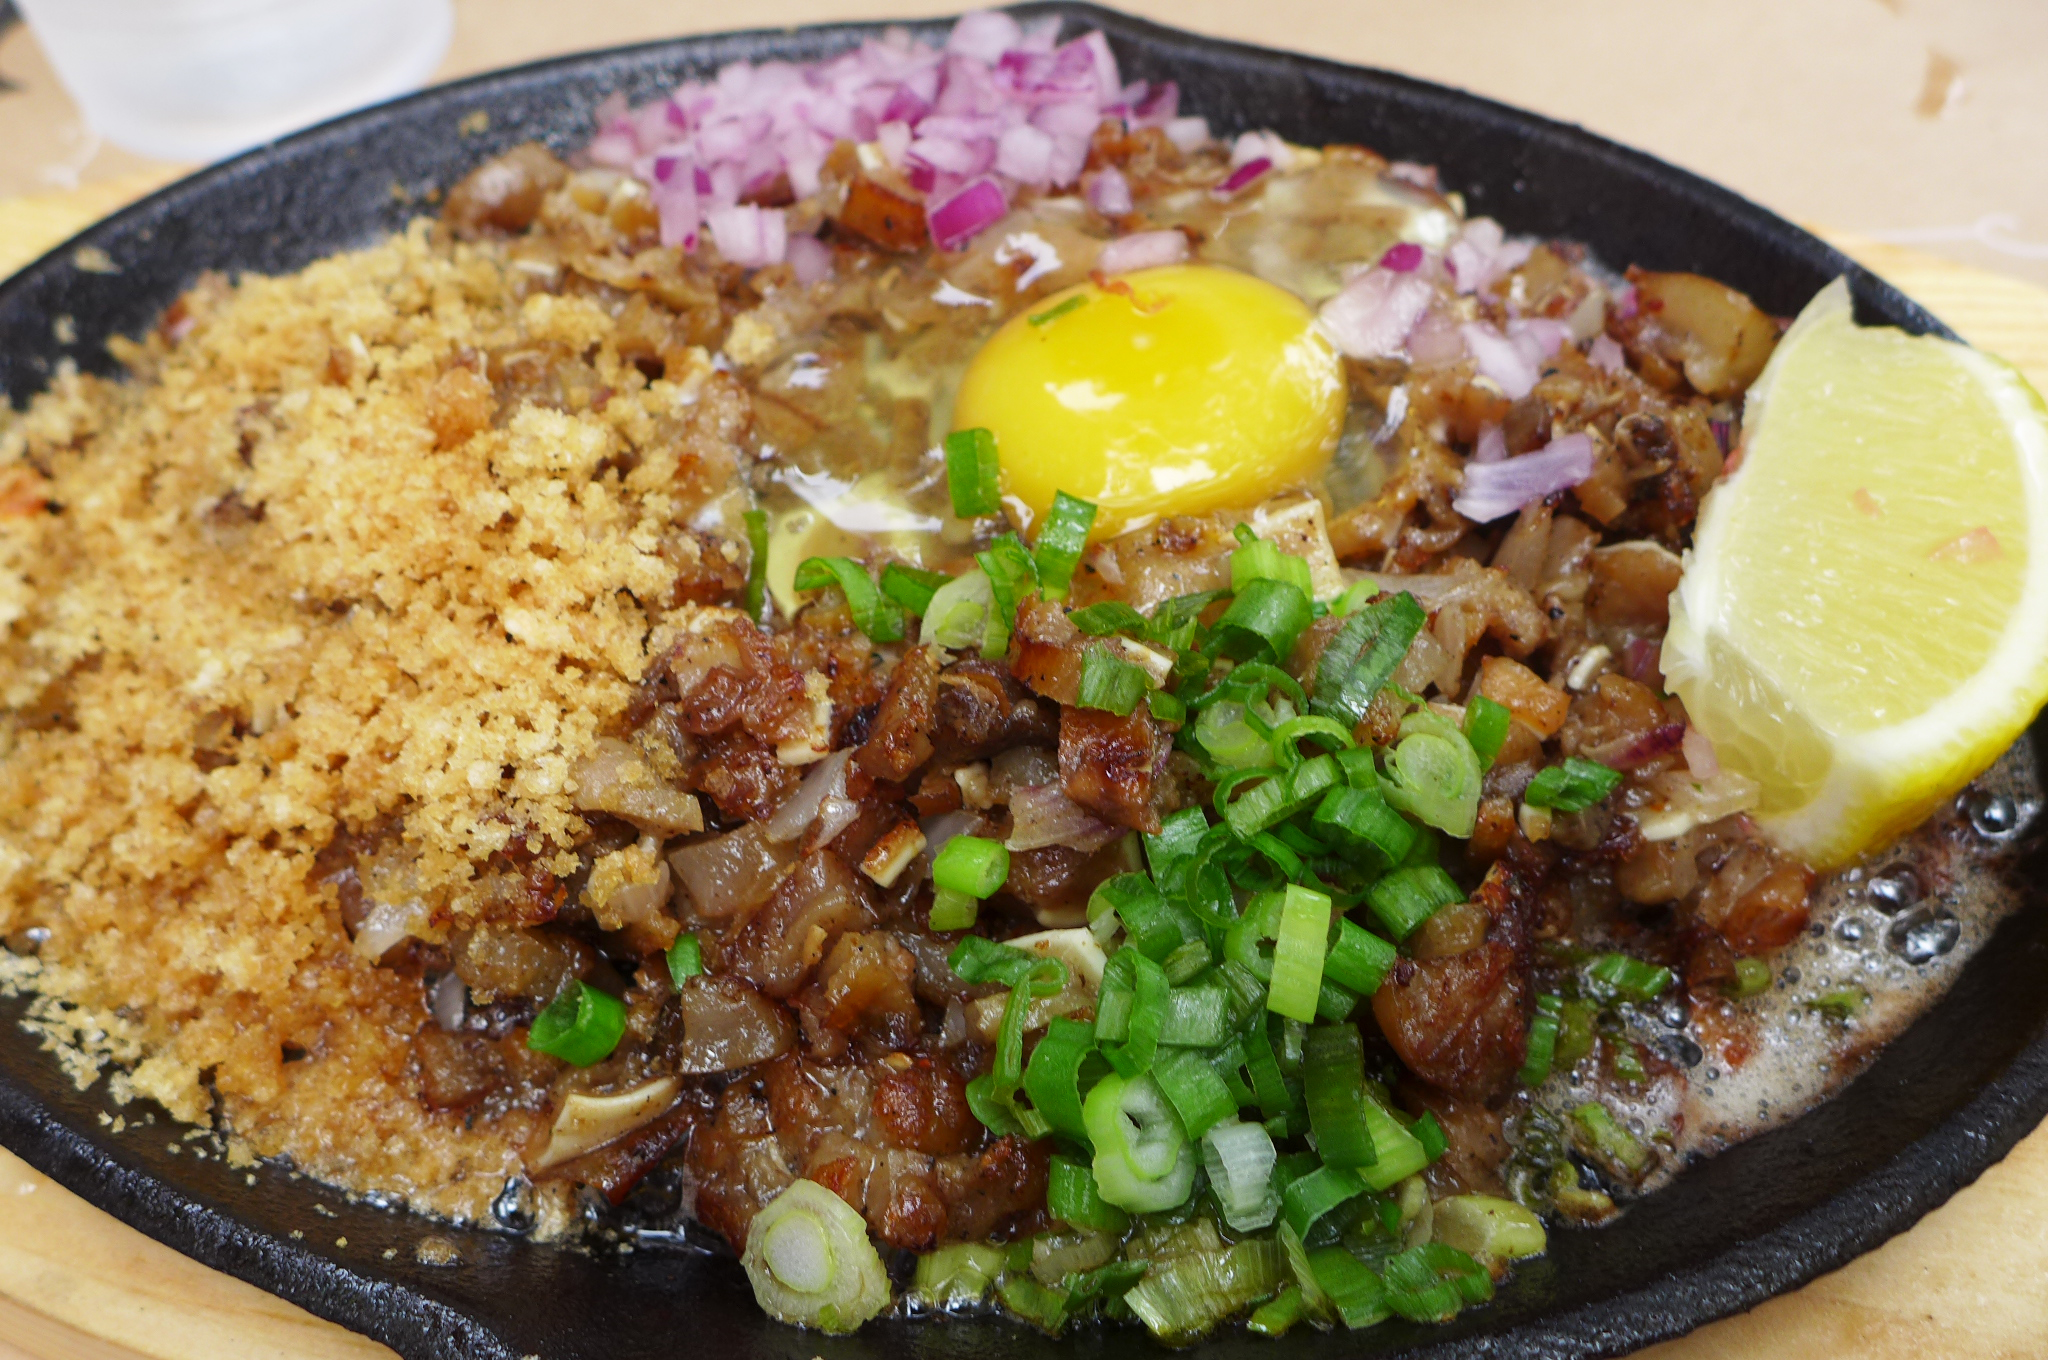 A black metal platter with minced pork parts and skin, plus a raw egg cracked on top.